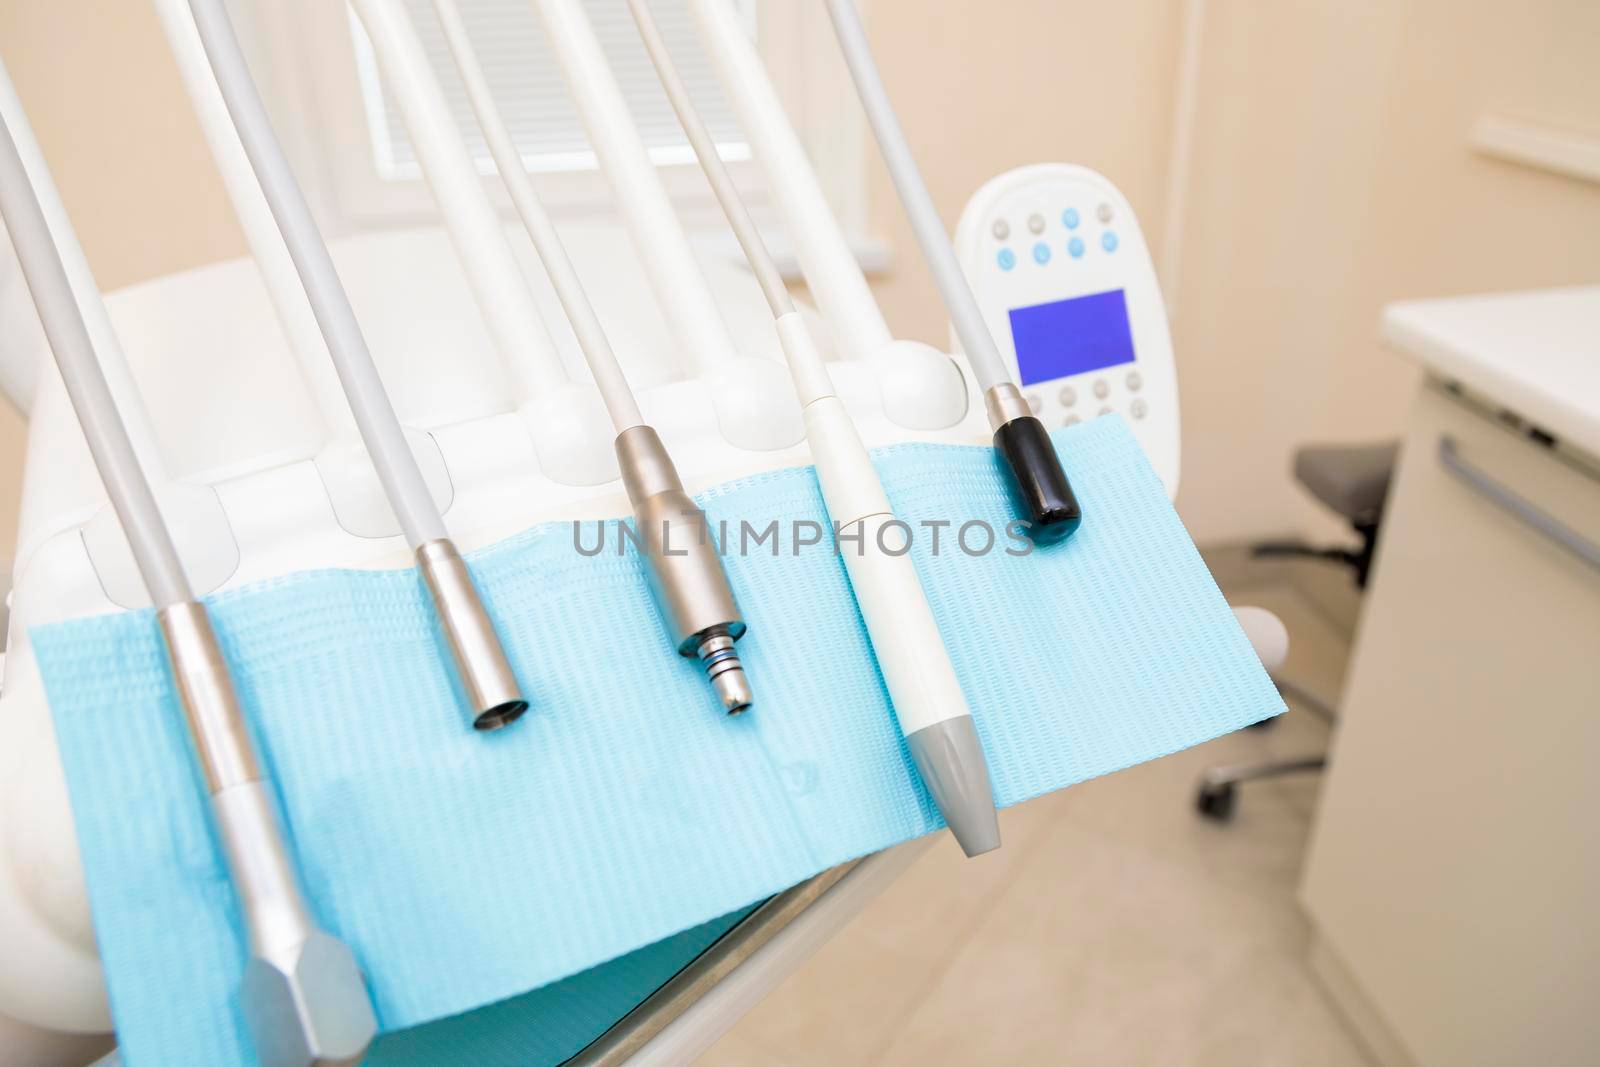 dental clinic interior design with chair and tools by Yurich32